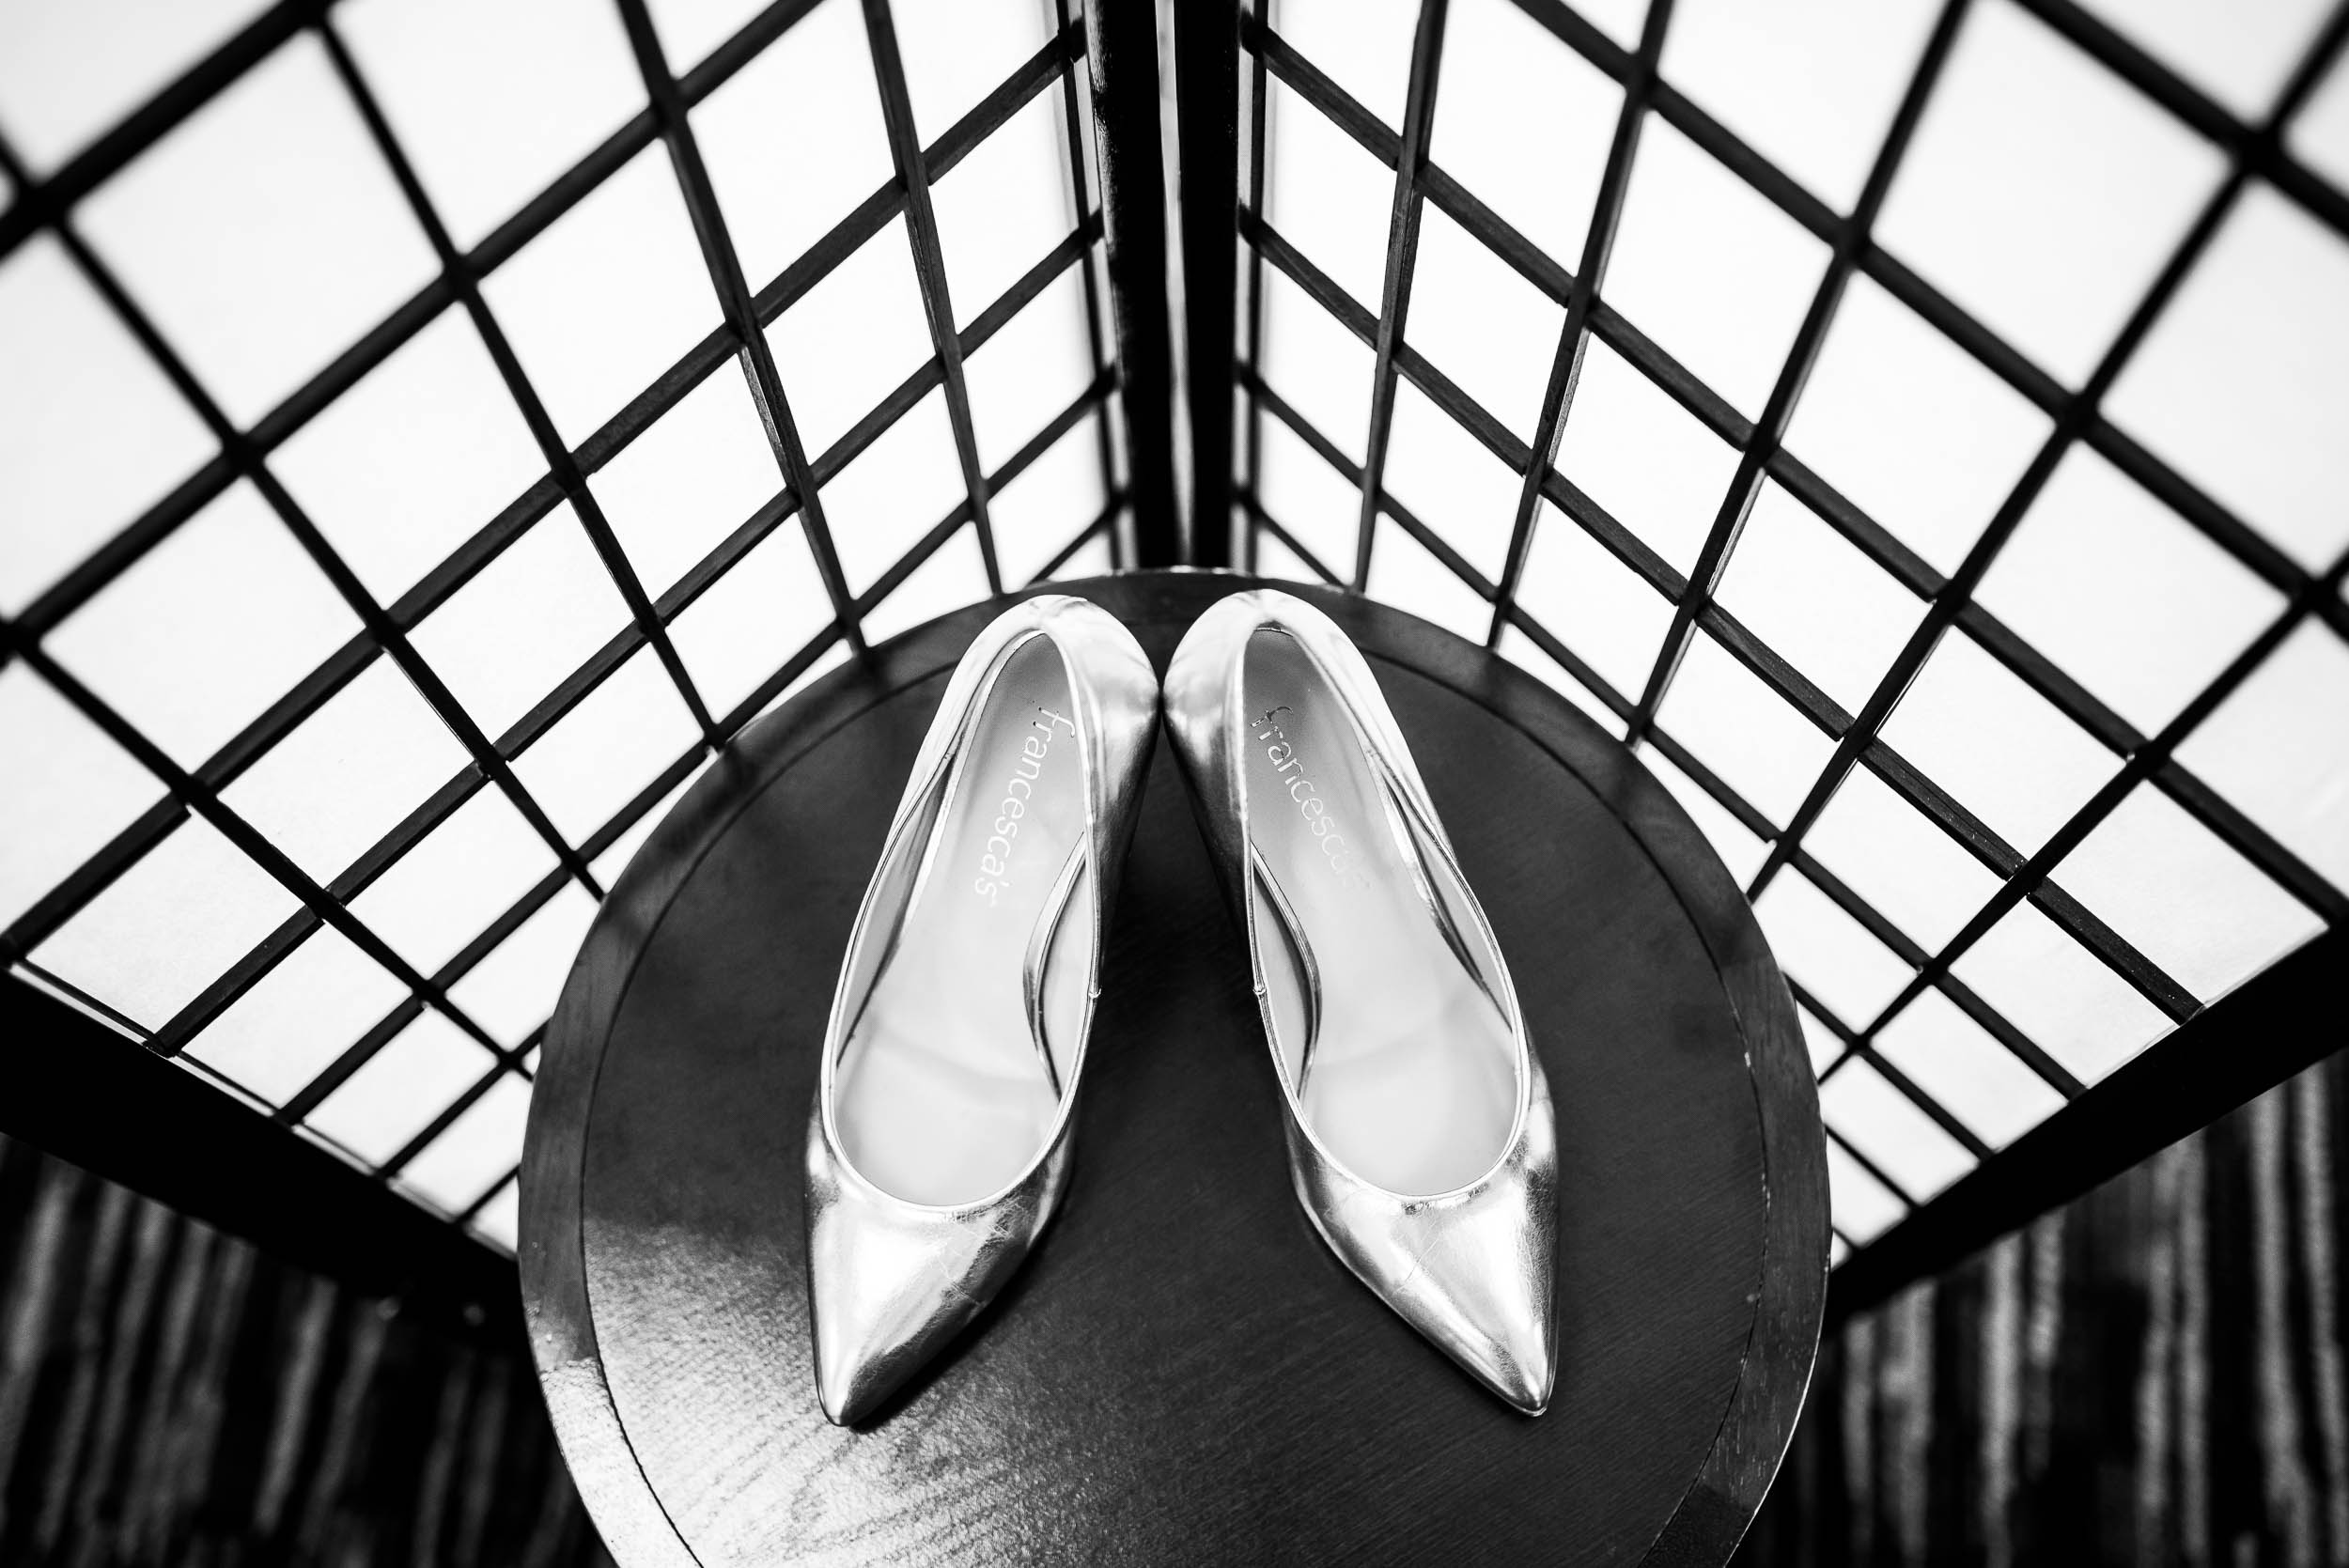 Bridal Shoes: Modern industrial Chicago wedding inside Prairie Street Brewhouse captured by J. Brown Photography. Find more wedding ideas at jbrownphotography.com!